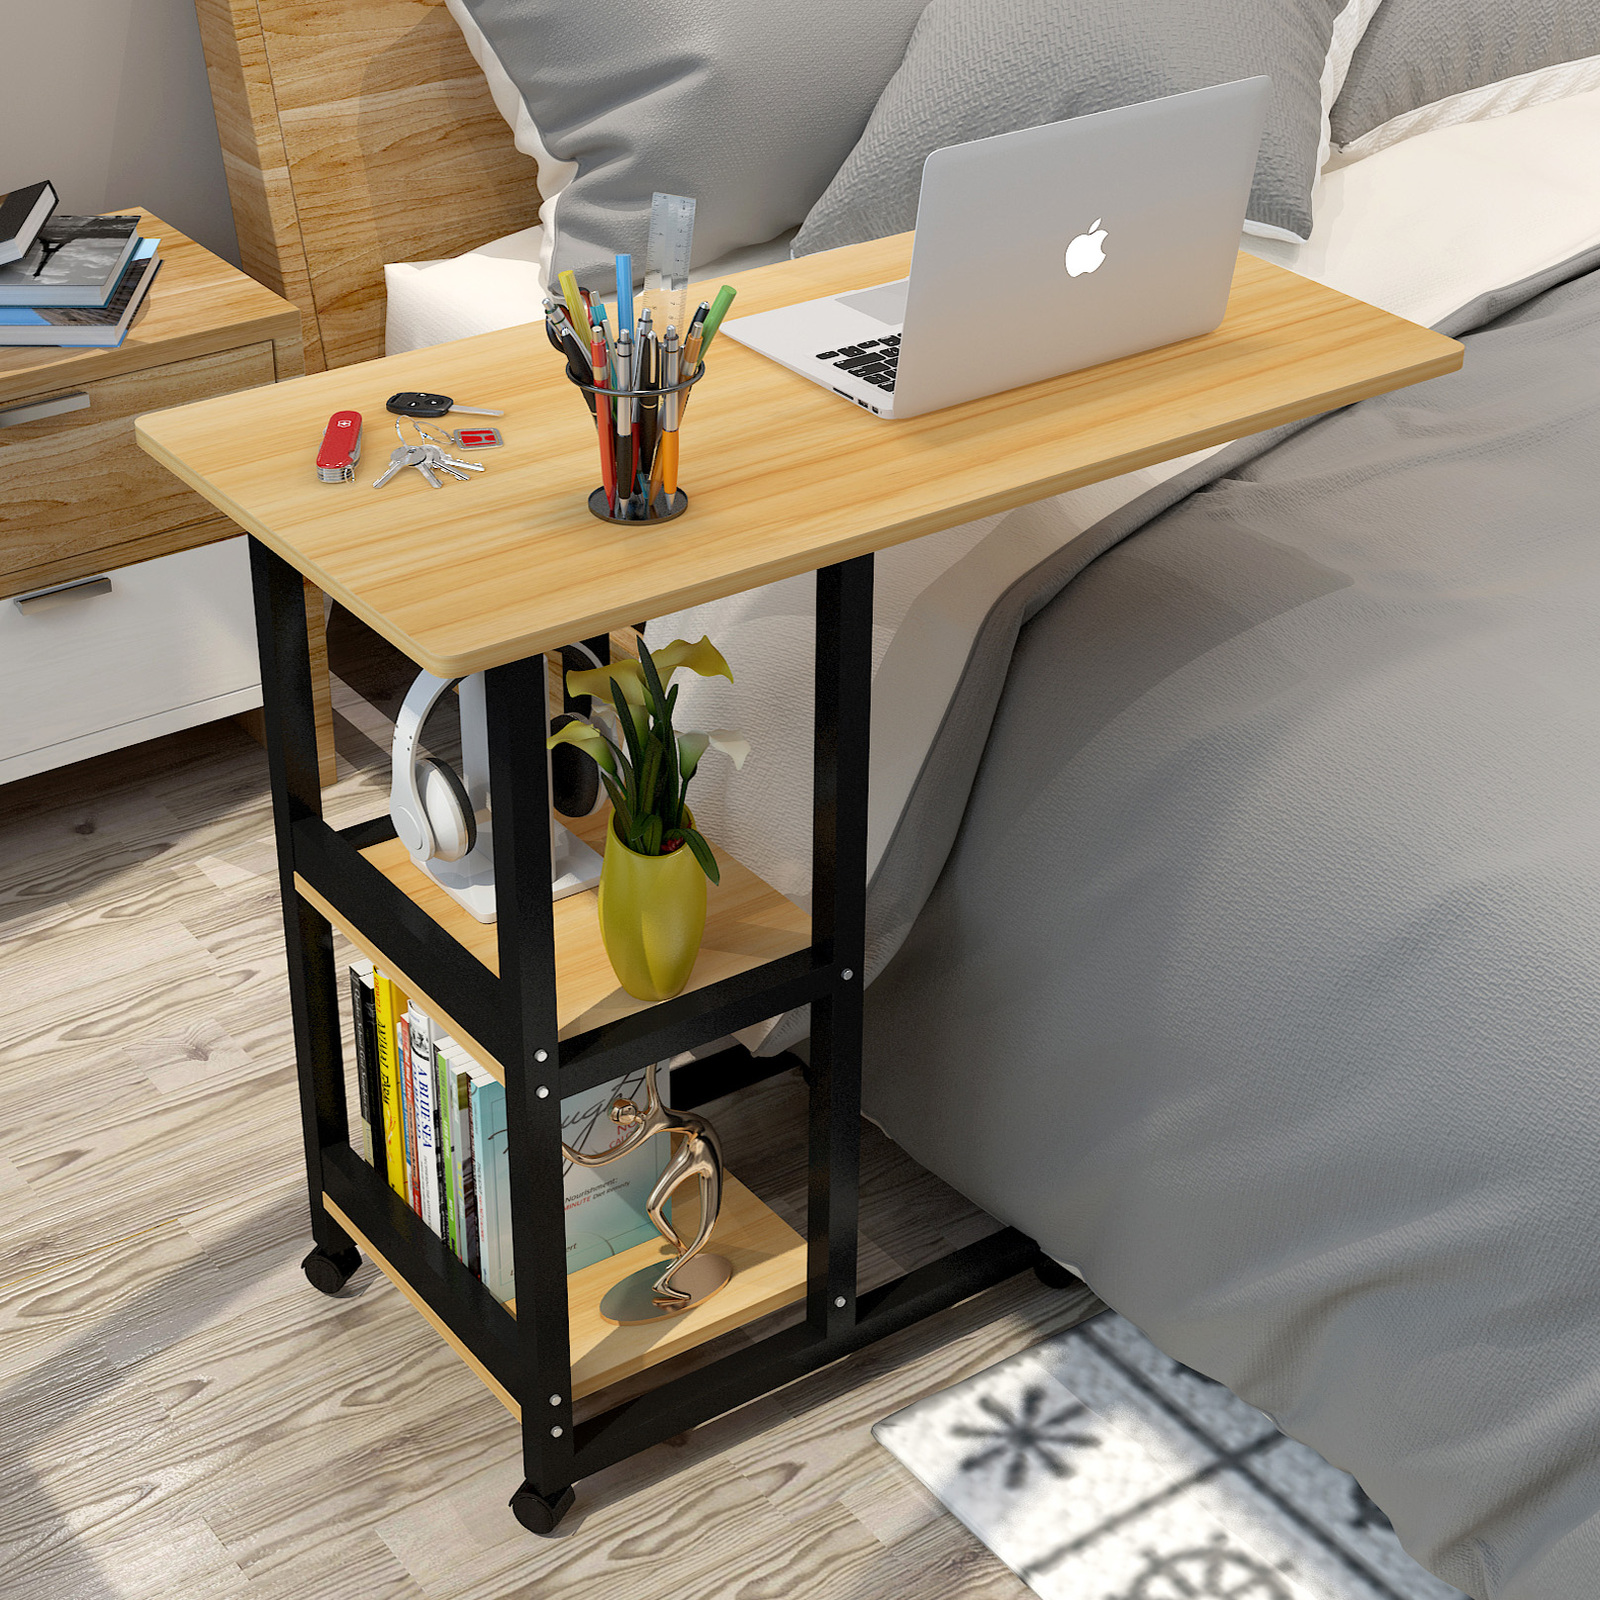 Supreme Sofa Bed Side Table Laptop Desk, 360 Rotating Sofa Side Table With Storage Shelves Wheels